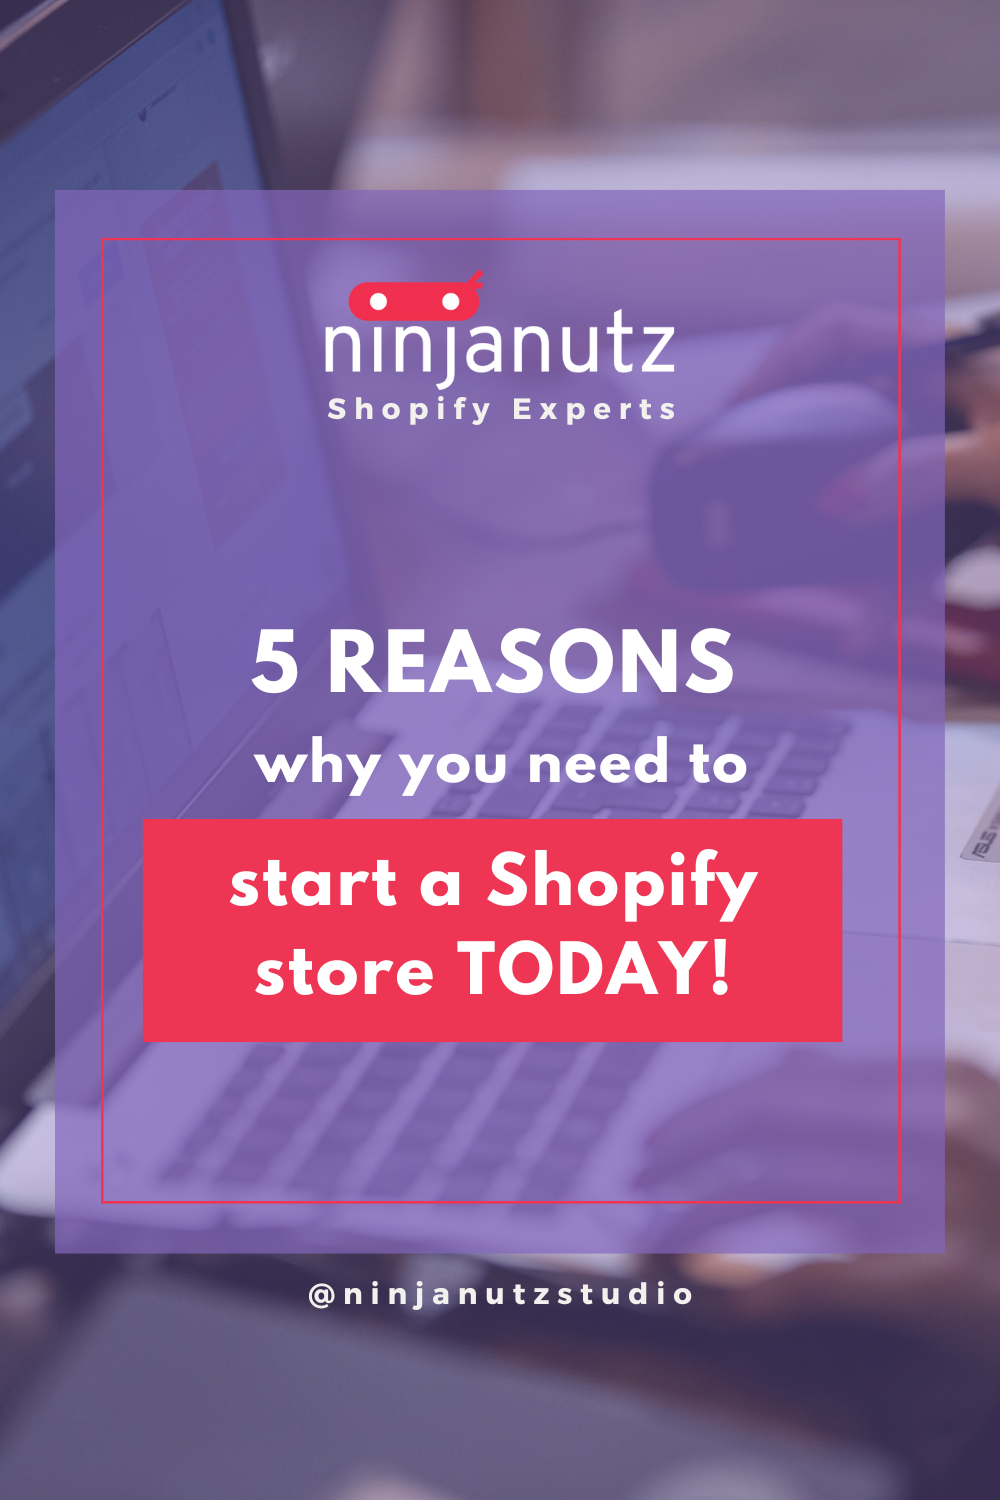 Five reasons why you need to start a Shopify store TODAY! NinjaNutz®